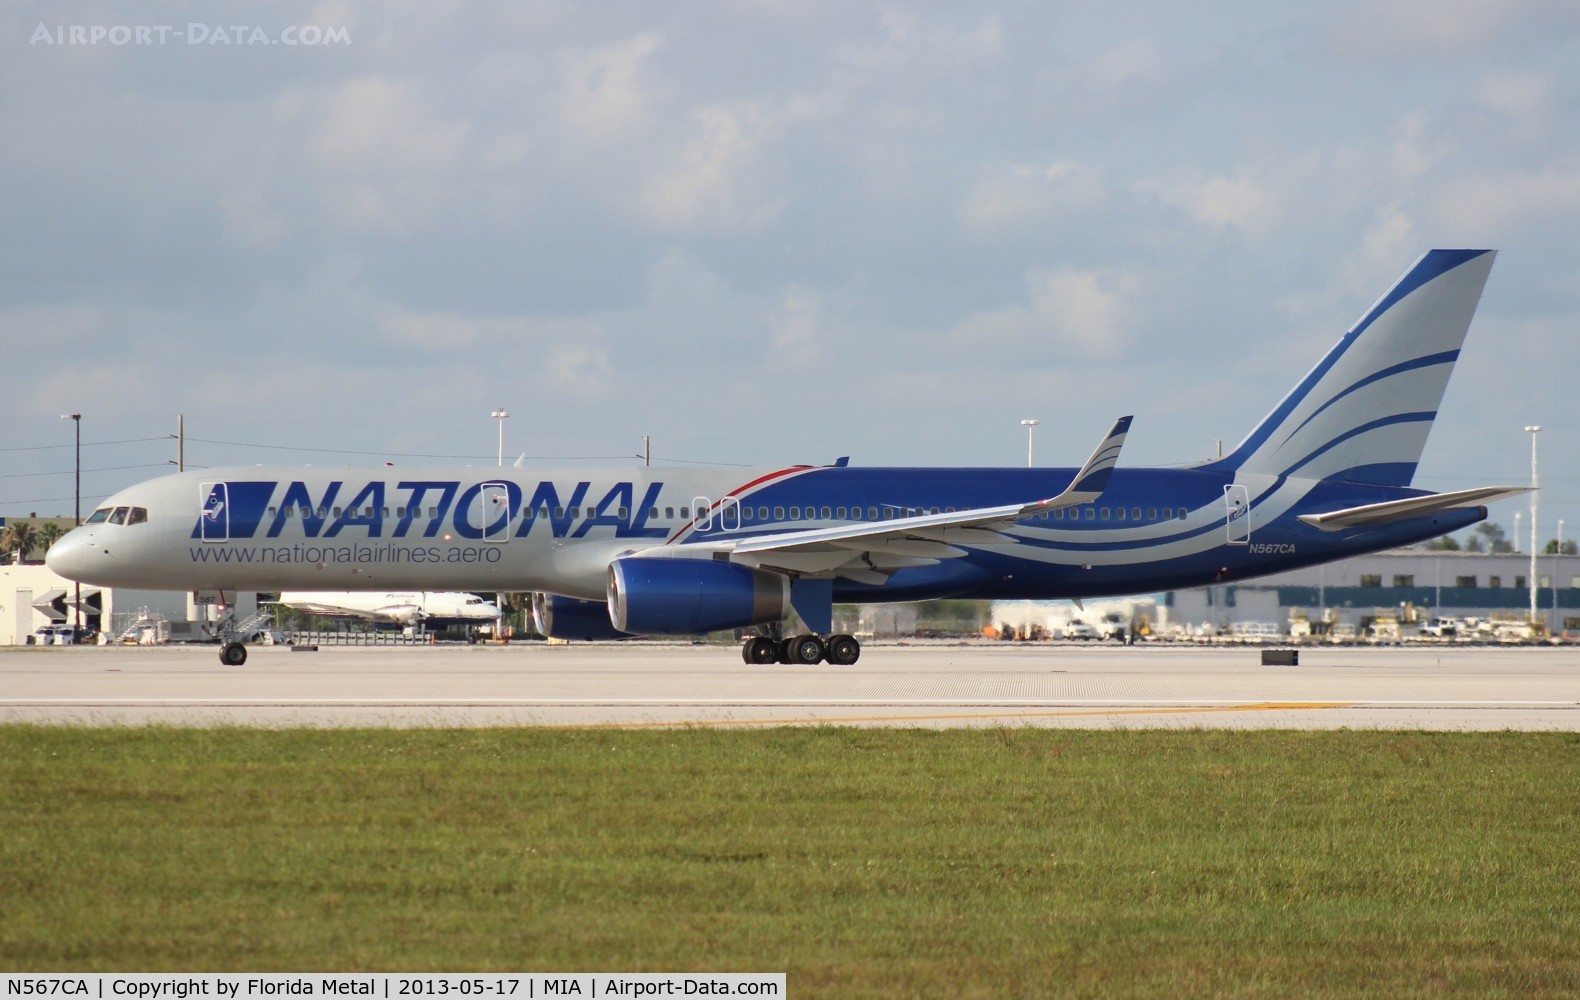 N567CA, 1991 Boeing 757-223 C/N 24608, Ex American Airlines 757 now with National Airlines